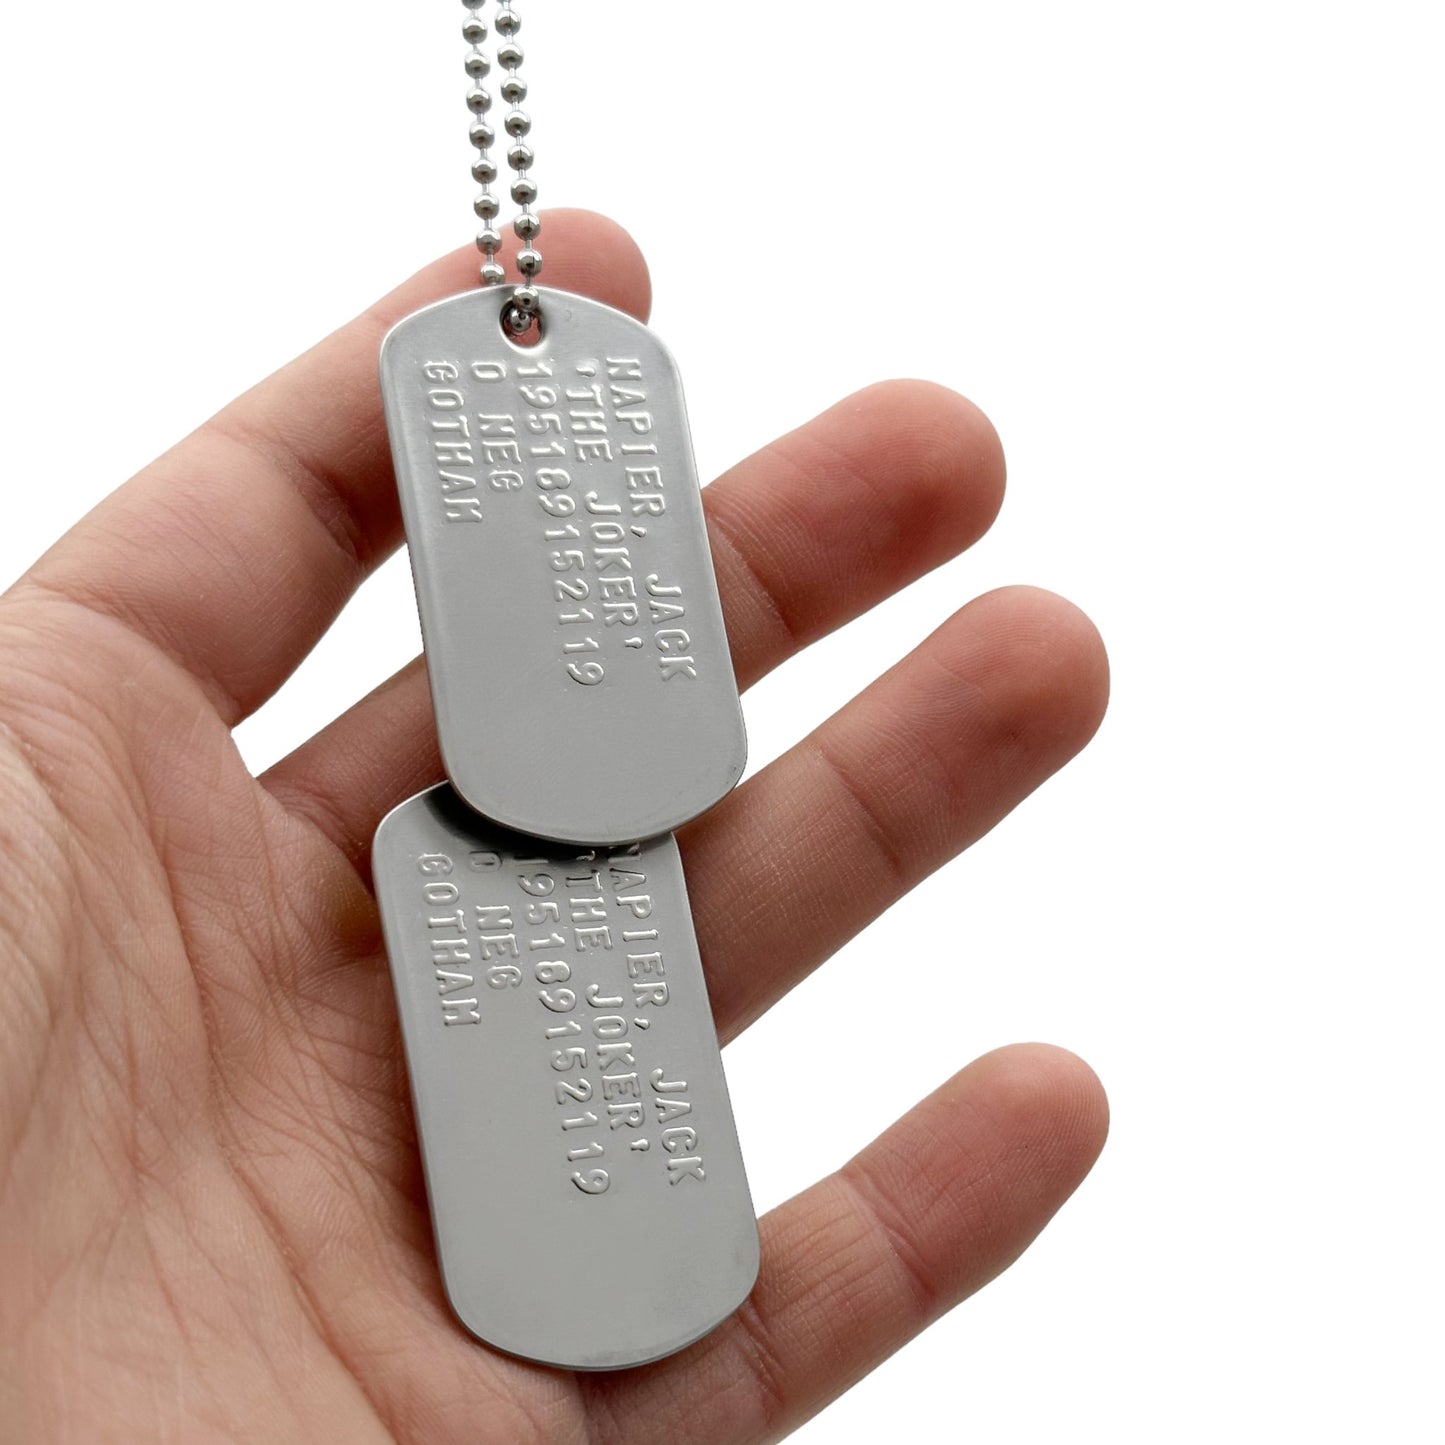 Jack Napier 'JOKER' Dog Tags - Costume Cosplay Prop Replica Military - Stainless Steel Chains Included - TheDogTagCo